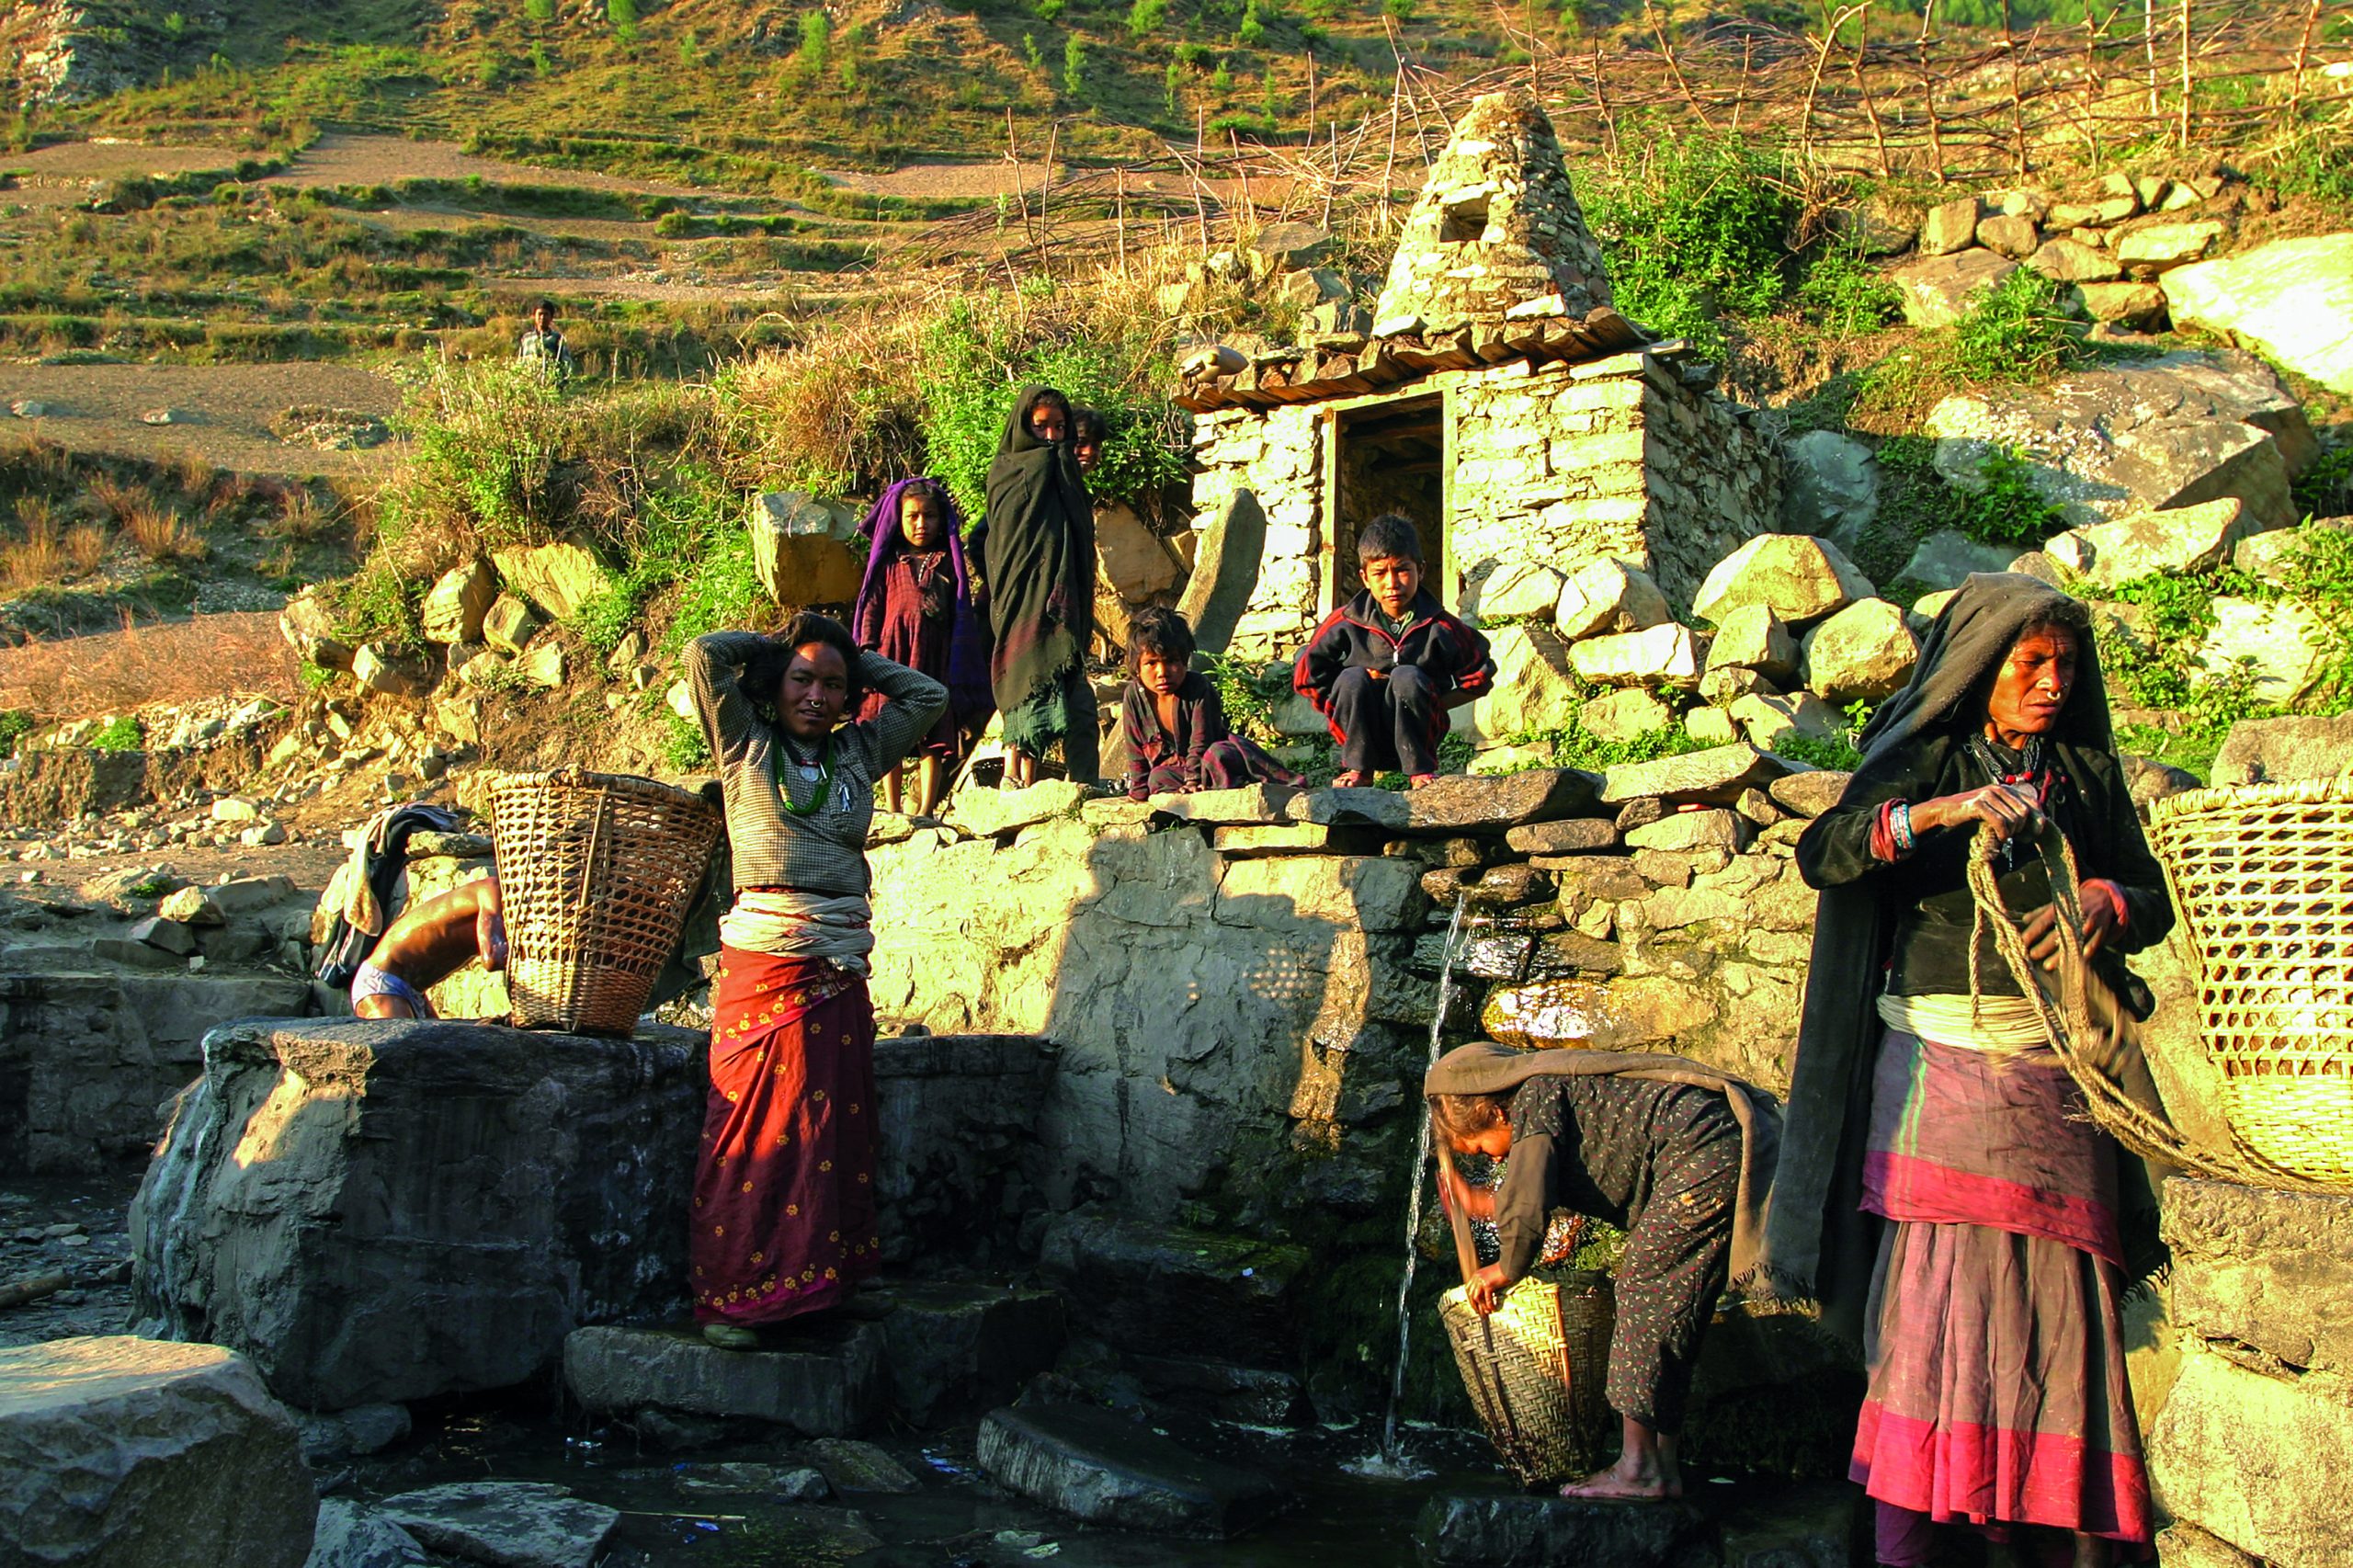 Women carry water in baskets and children watch the action. The terrain is rocky. Water runs down a slope.